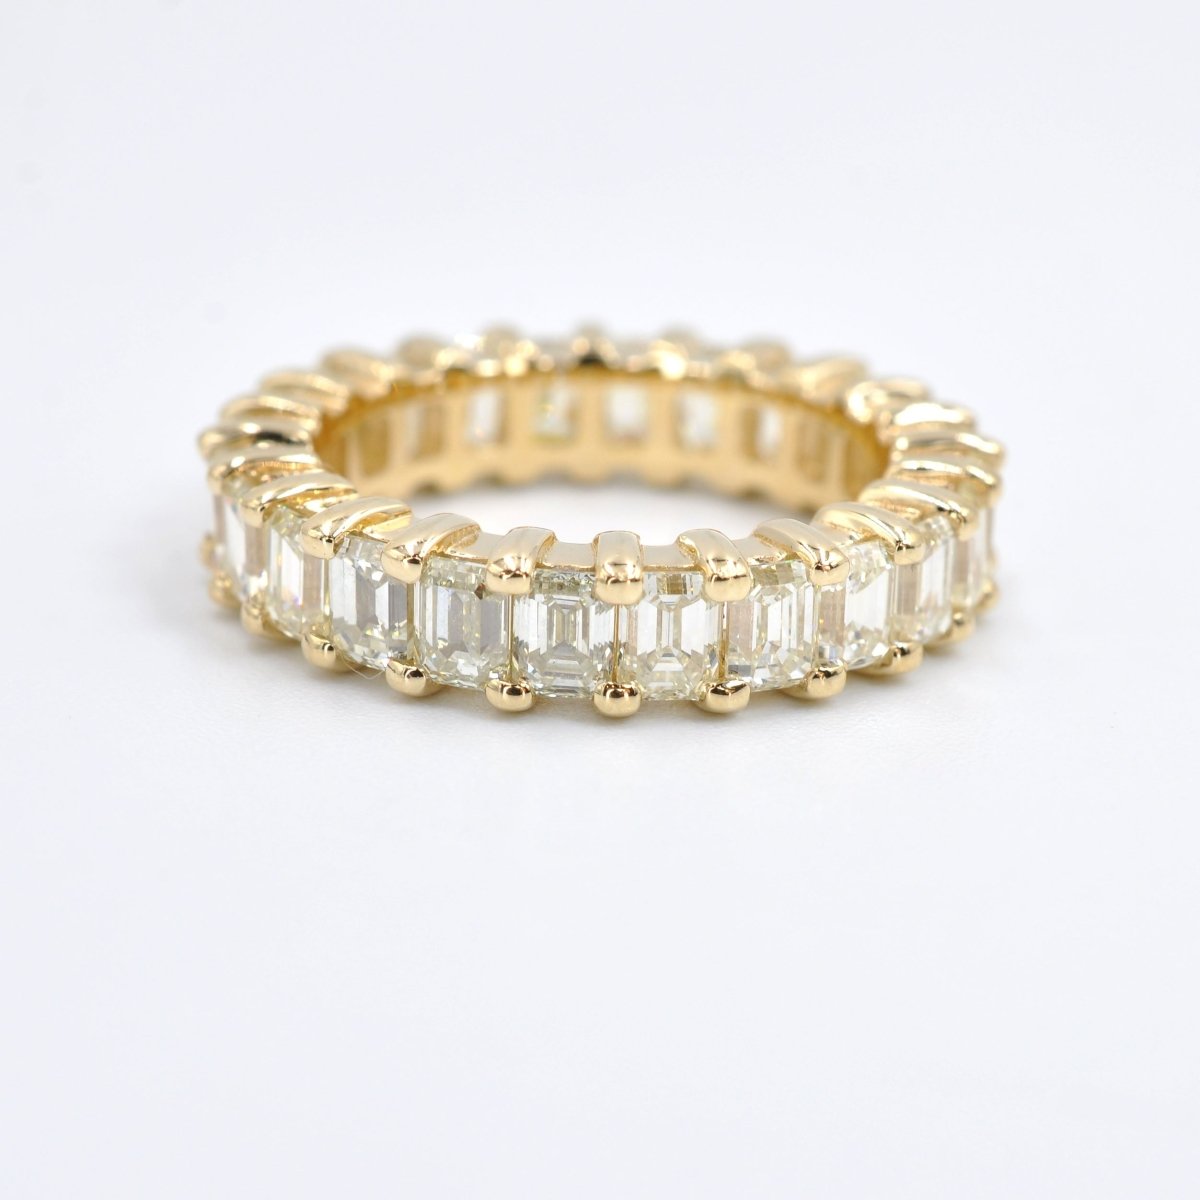 Selected 6.00CT Emerald Cut Diamond Eternity Ring in 14KT Yellow Gold - Primestyle.com